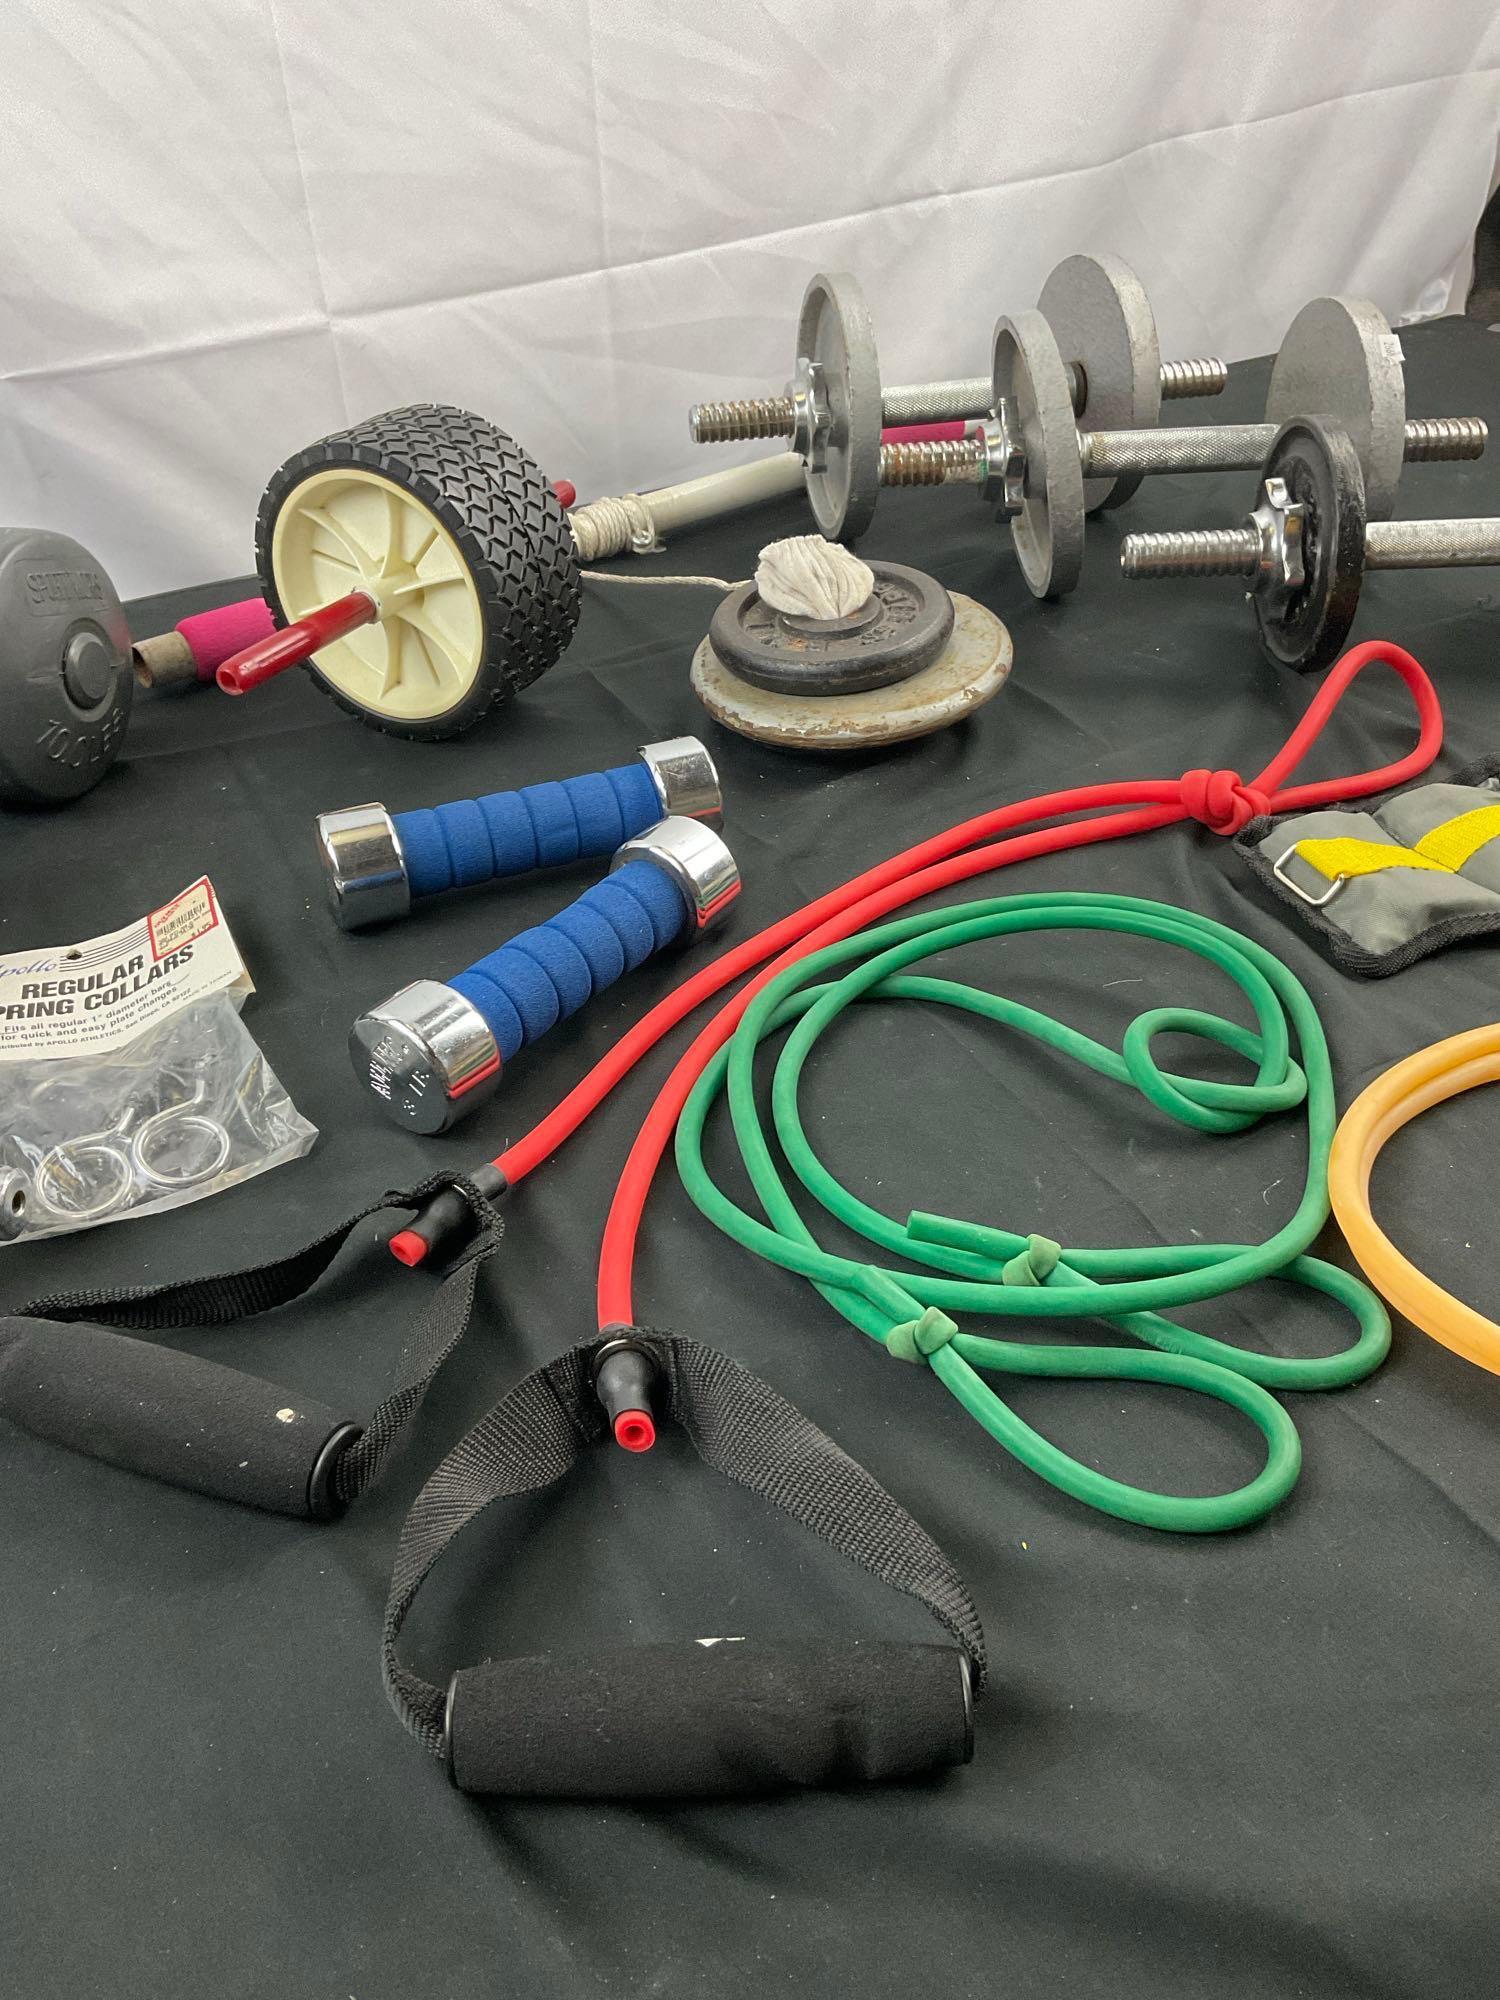 15 pcs Vintage Home Gym Work Out Exercise Equipment Assortment. Sport Works 10 LB Barbells. See